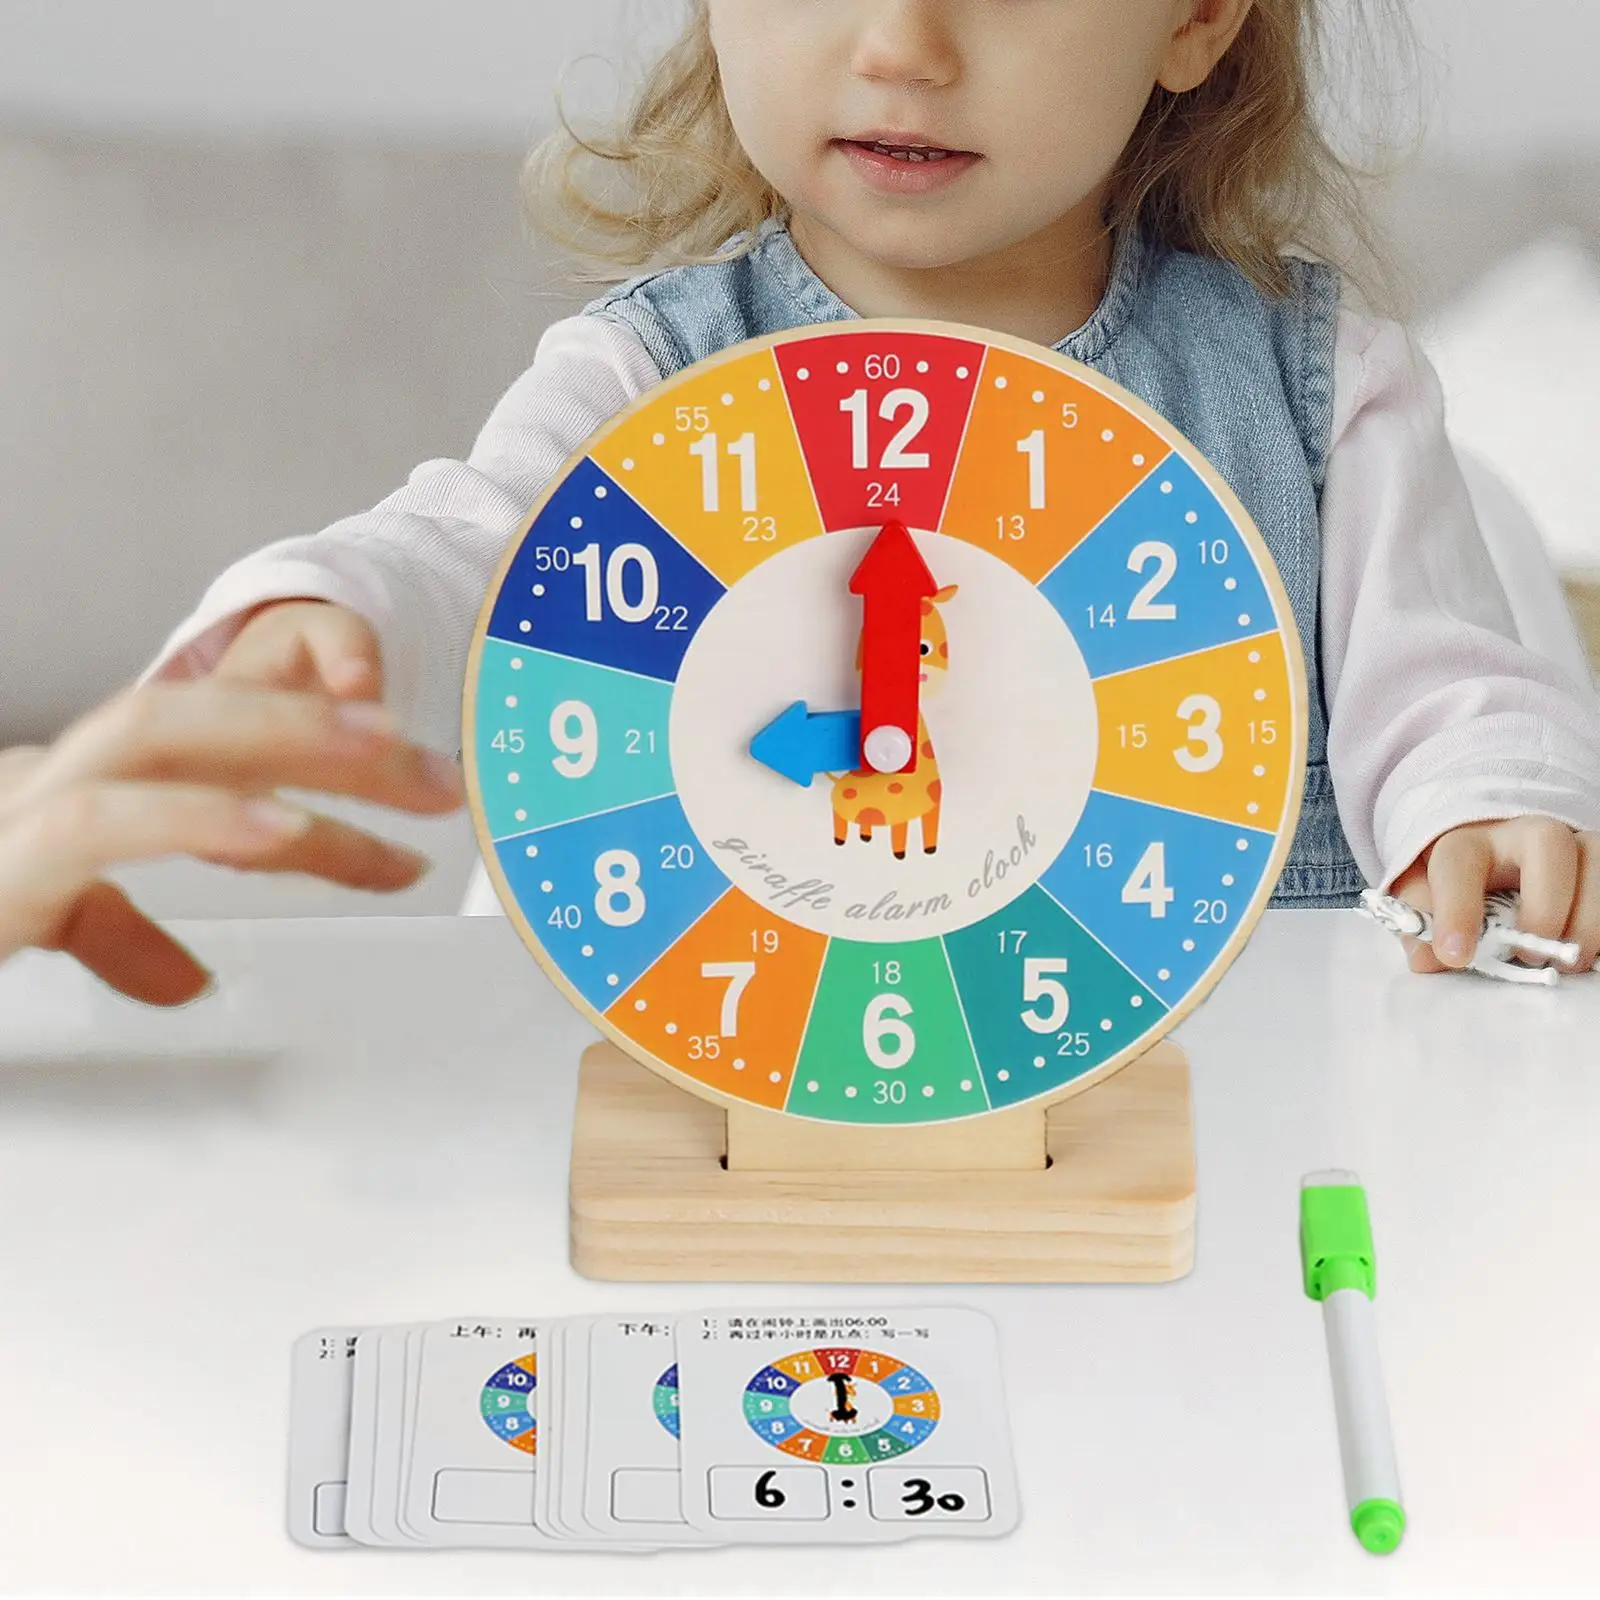 Sensory Toy Educational Gift Telling Time Motor Skills Kids Teaching Clocks for Learning Activities Teaching Aids Boys and Girls